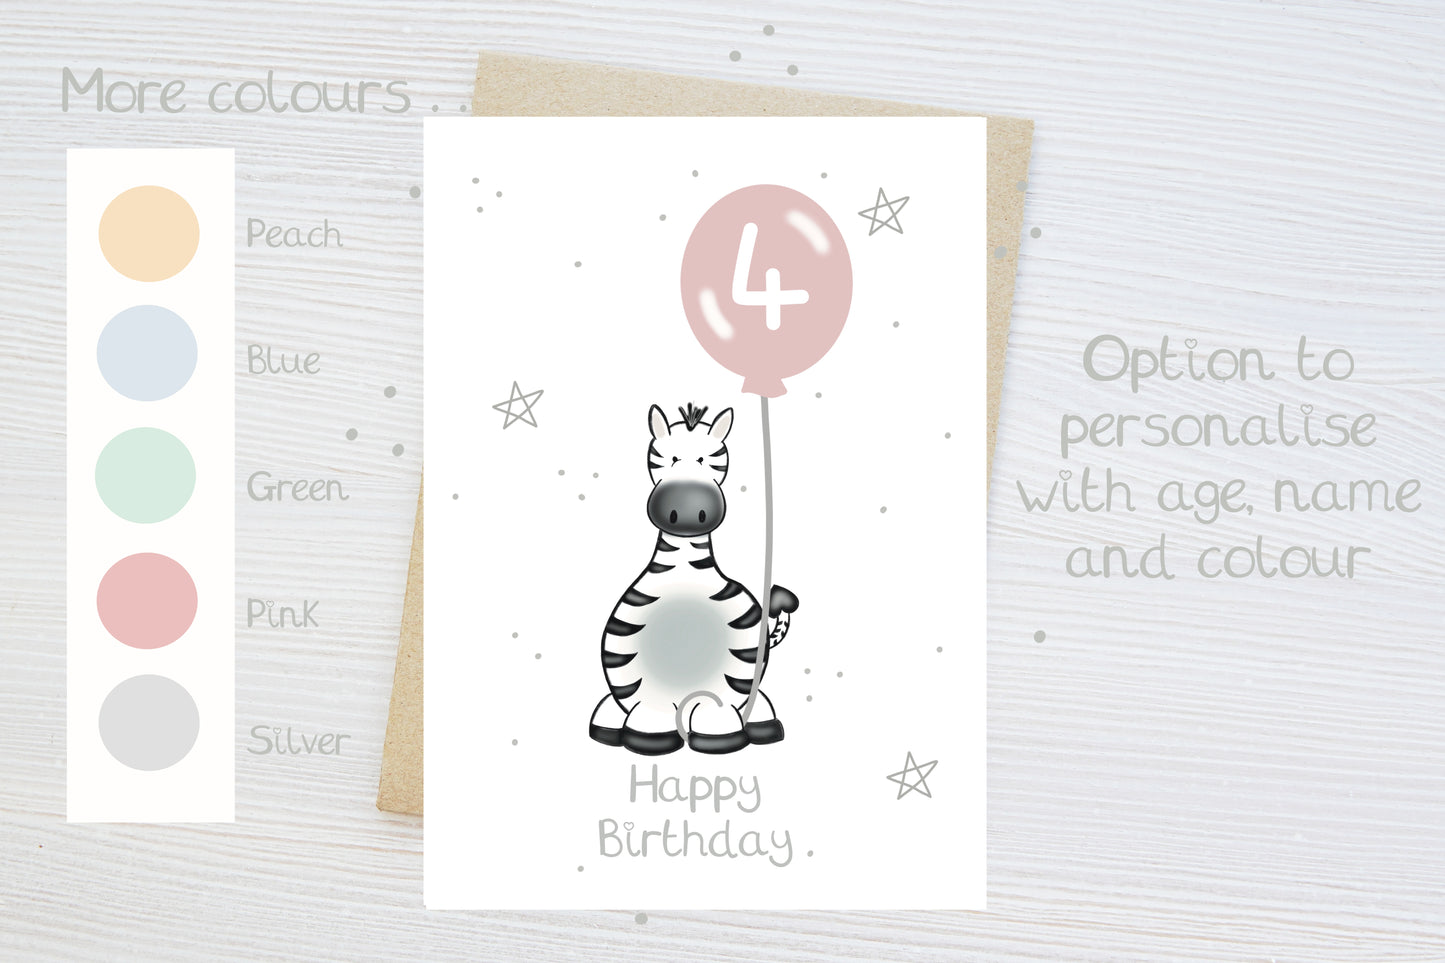 colour chart to choose personalised milestone birthday card text colour options for girls and boys greetings card